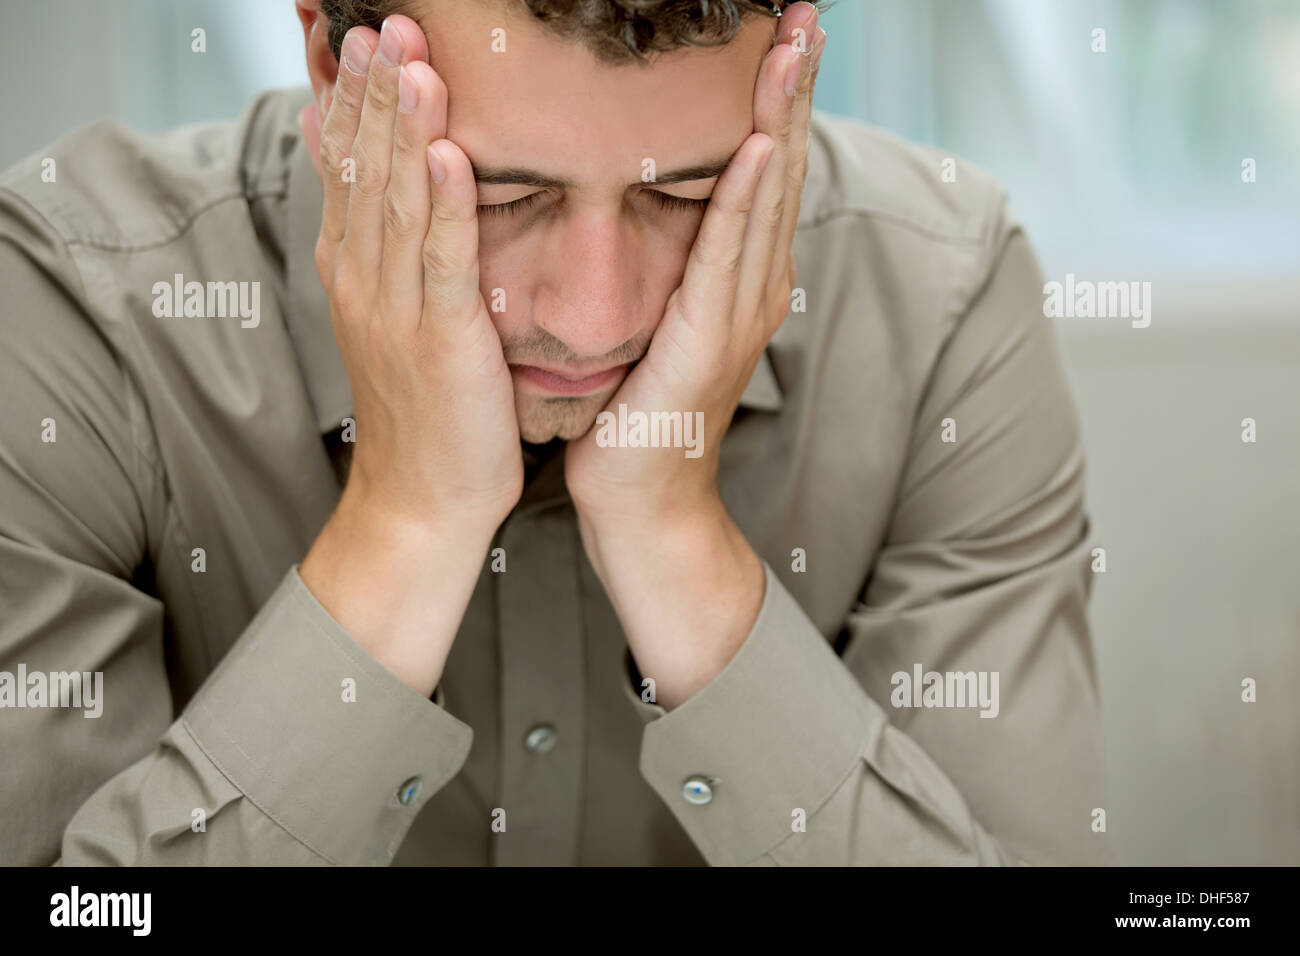 Young man covering cheeks with hands Stock Photo